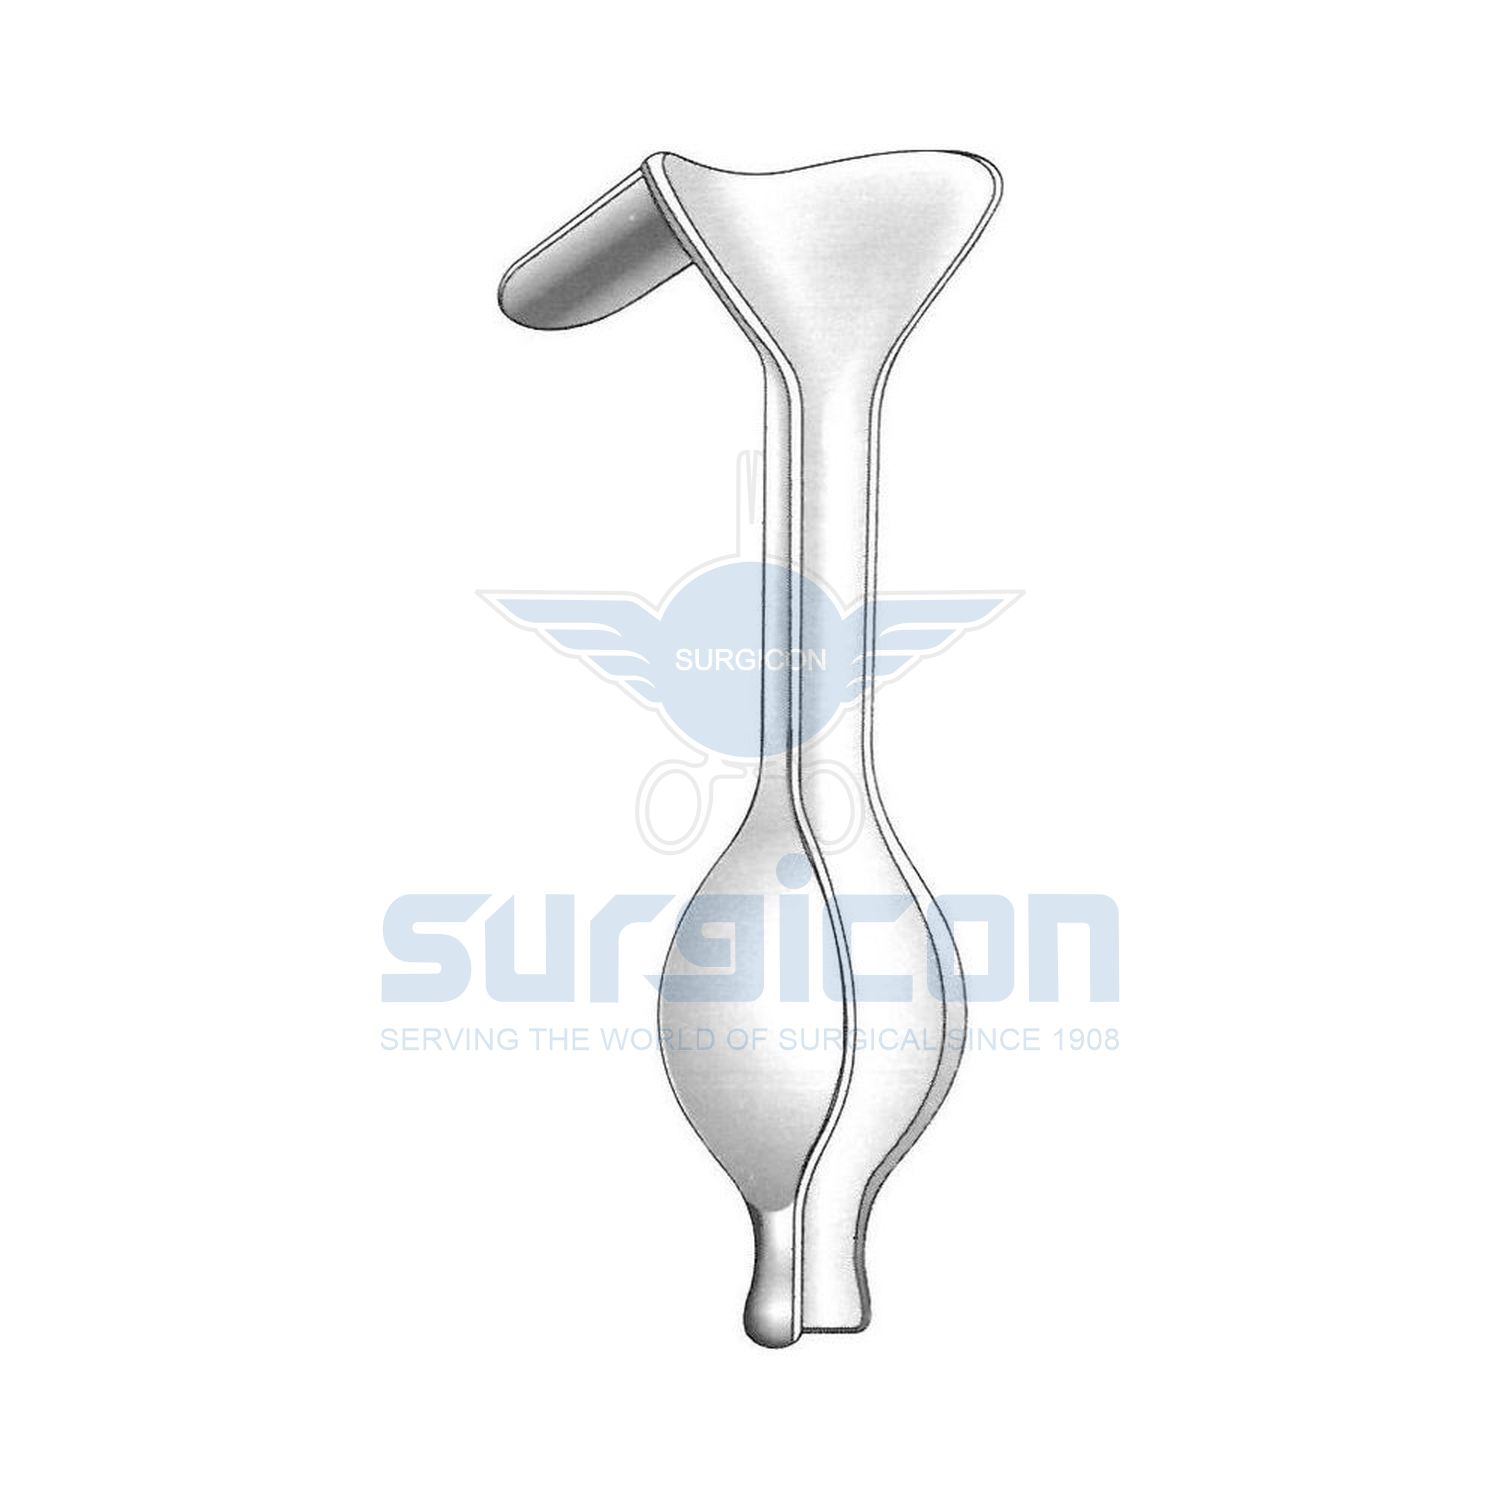 Auvard-Weighted-Vaginal-Specula-J-20-2390